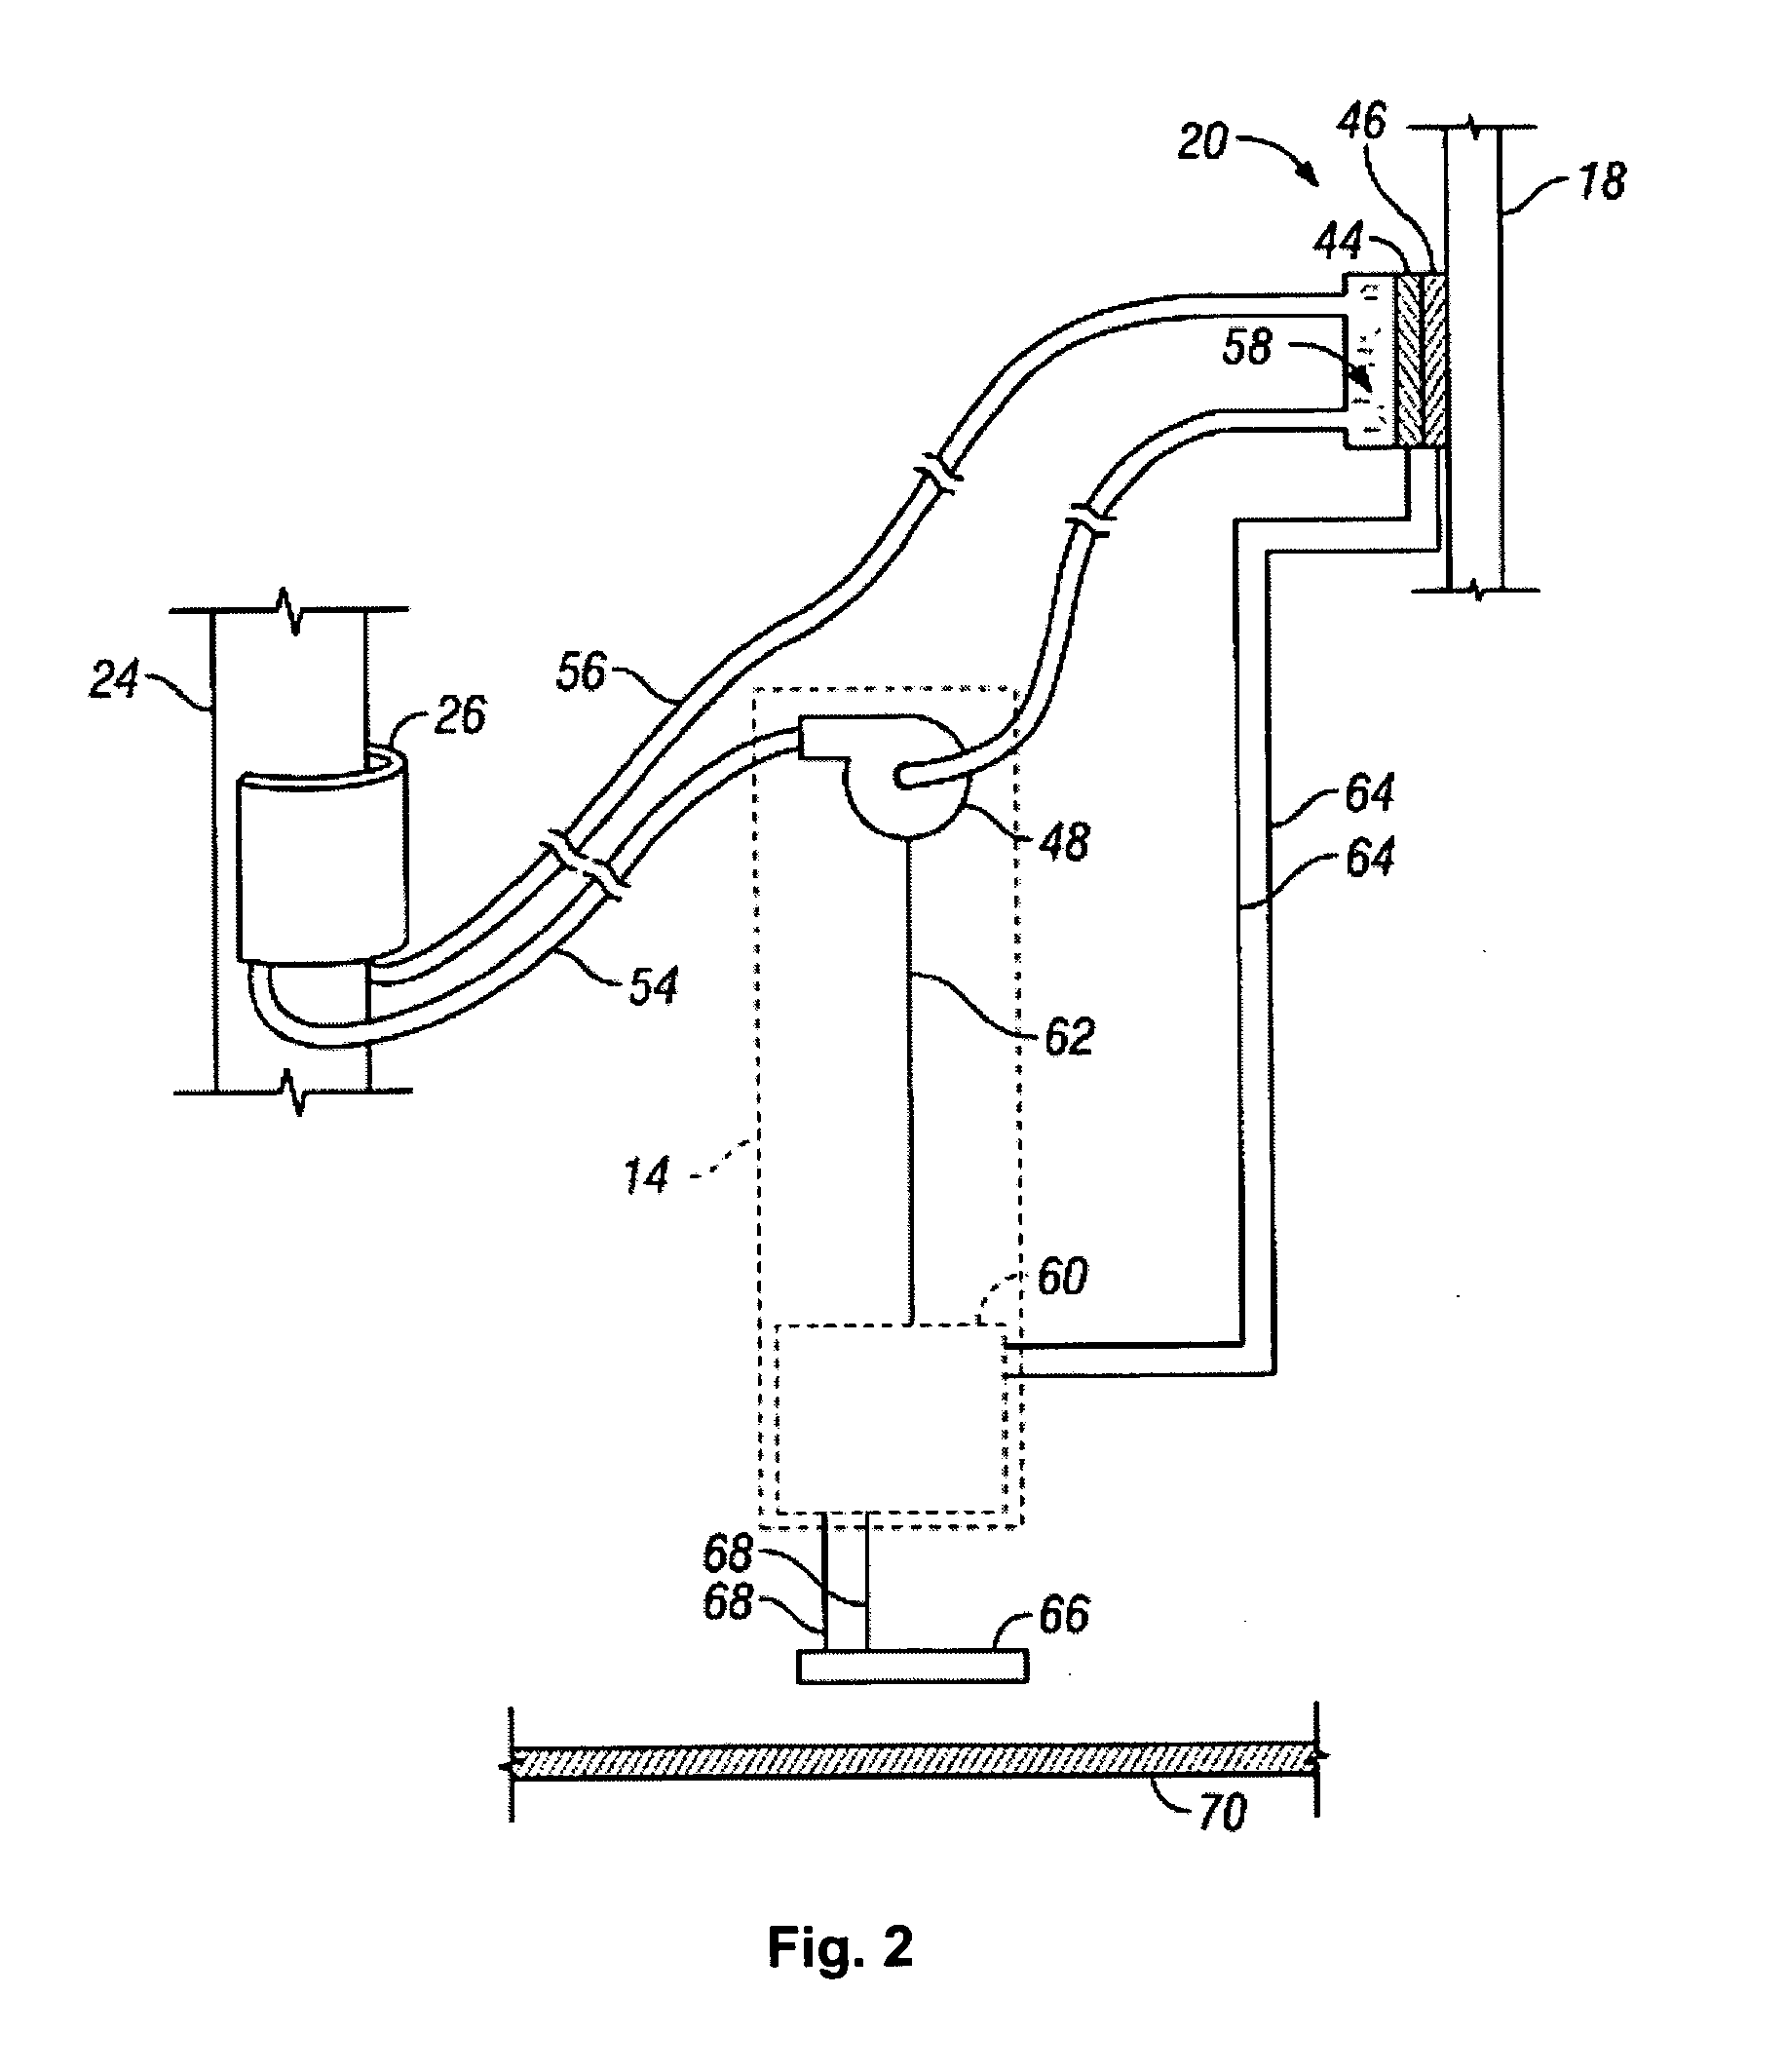 Apparatus and methods for altering temperature in a region within the body